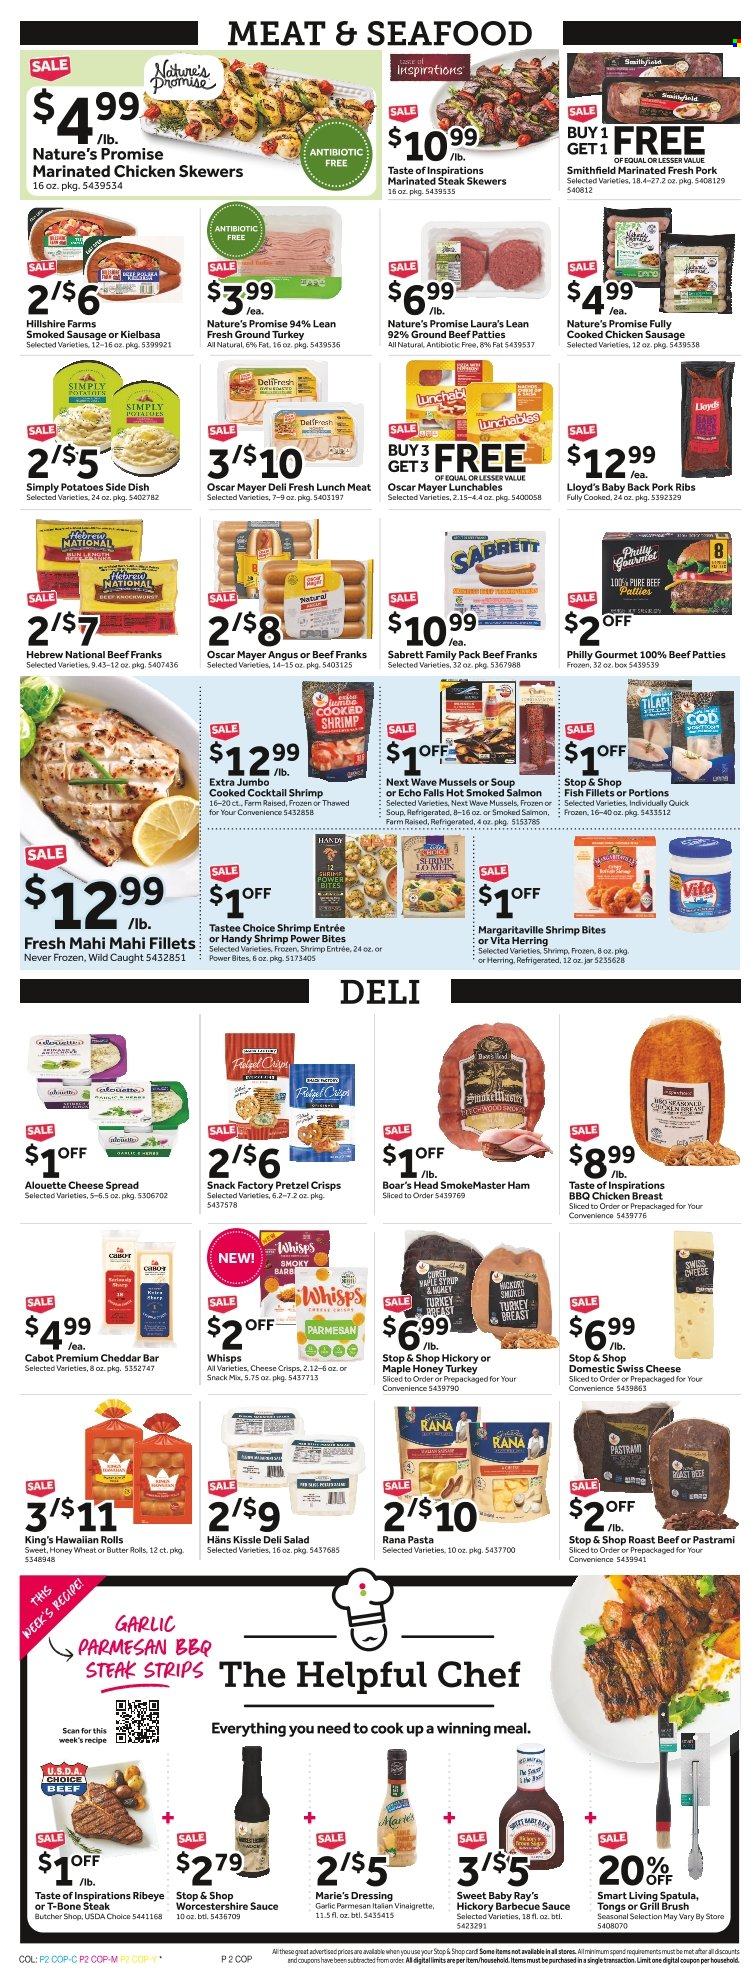 thumbnail - Stop & Shop Flyer - 05/20/2022 - 05/26/2022 - Sales products - Nature’s Promise, hawaiian rolls, potatoes, ground turkey, chicken breasts, marinated chicken, beef meat, ground beef, t-bone steak, steak, roast beef, pork meat, pork ribs, pork back ribs, cod, fish fillets, mahi mahi, mussels, salmon, smoked salmon, herring, seafood, fish, shrimps, soup, pasta, sauce, Lunchables, Rana, ham, pastrami, Oscar Mayer, sausage, smoked sausage, chicken sausage, kielbasa, cheese spread, lunch meat, swiss cheese, cheddar, butter, strips, pretzel crisps, BBQ sauce, vinaigrette dressing, worcestershire sauce, dressing, honey, WAVE. Page 2.